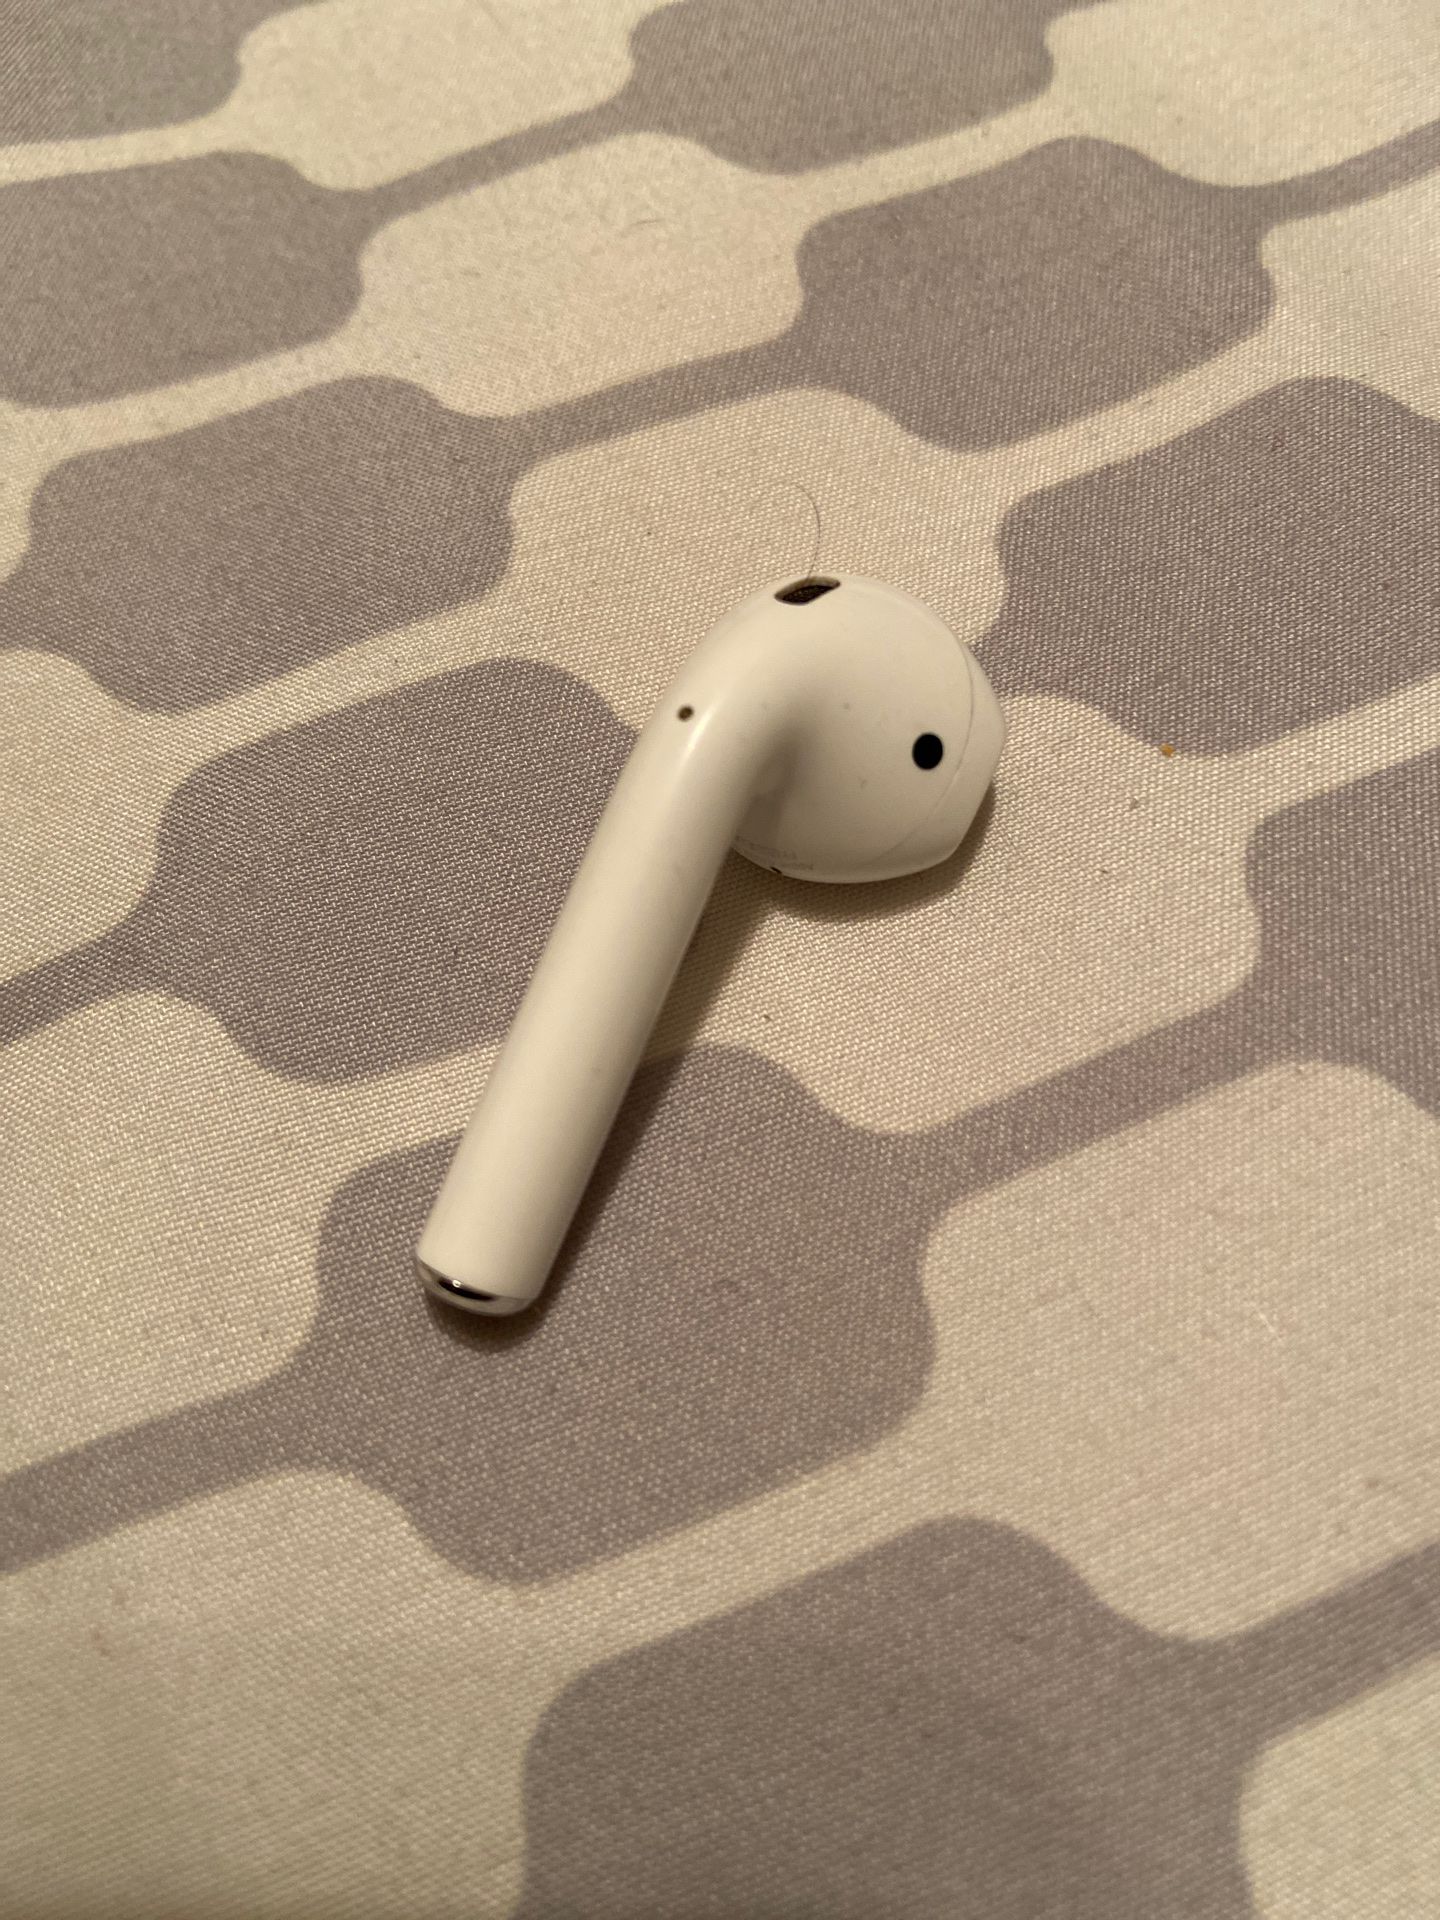 right airpod 2nd gen